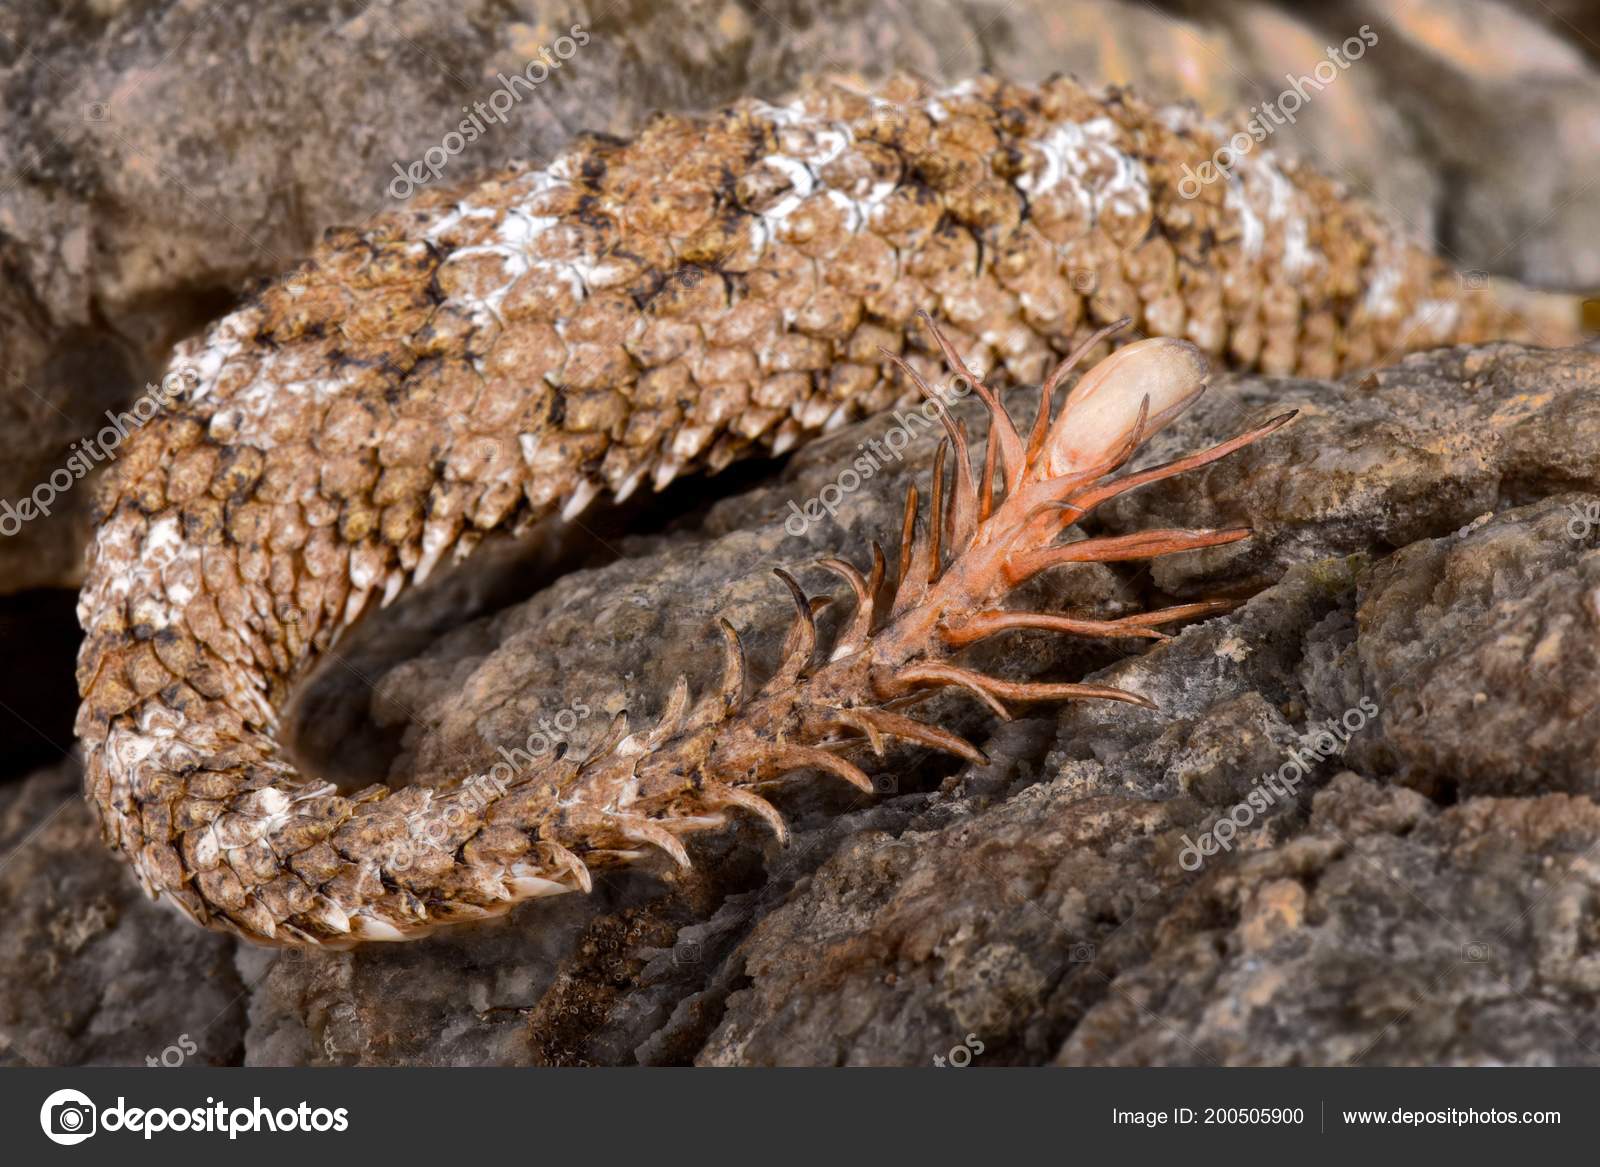 Spider Tailed Horned Viper Pseudocerastes Urarachnoides Species Viper  Endemic Western — Stock Photo © REPTILES4ALL #200505900